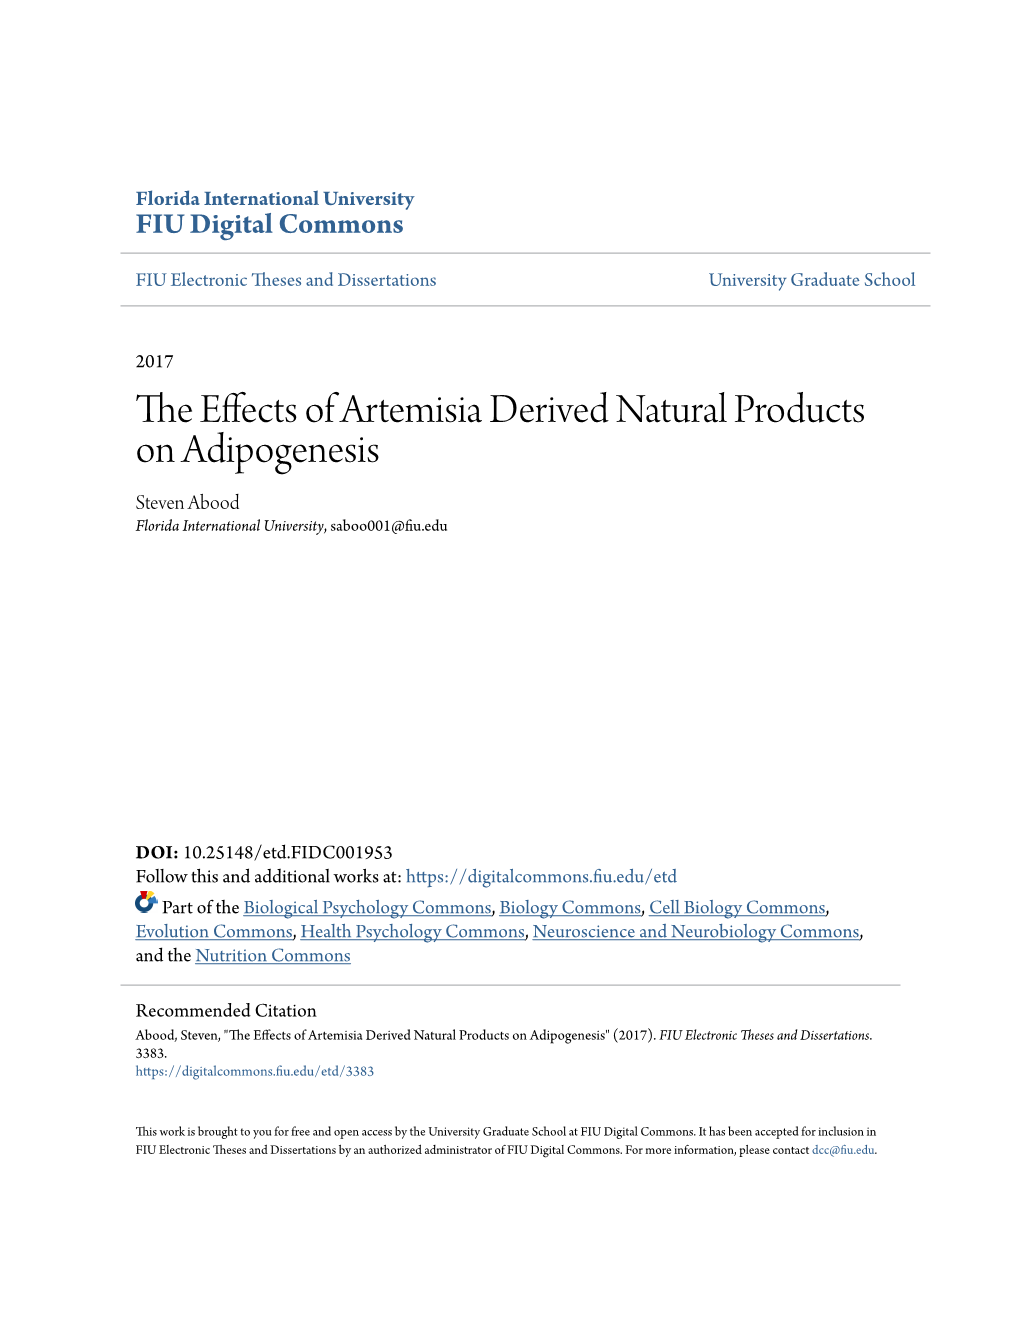 The Effects of Artemisia Derived Natural Products on Adipogenesis" (2017)